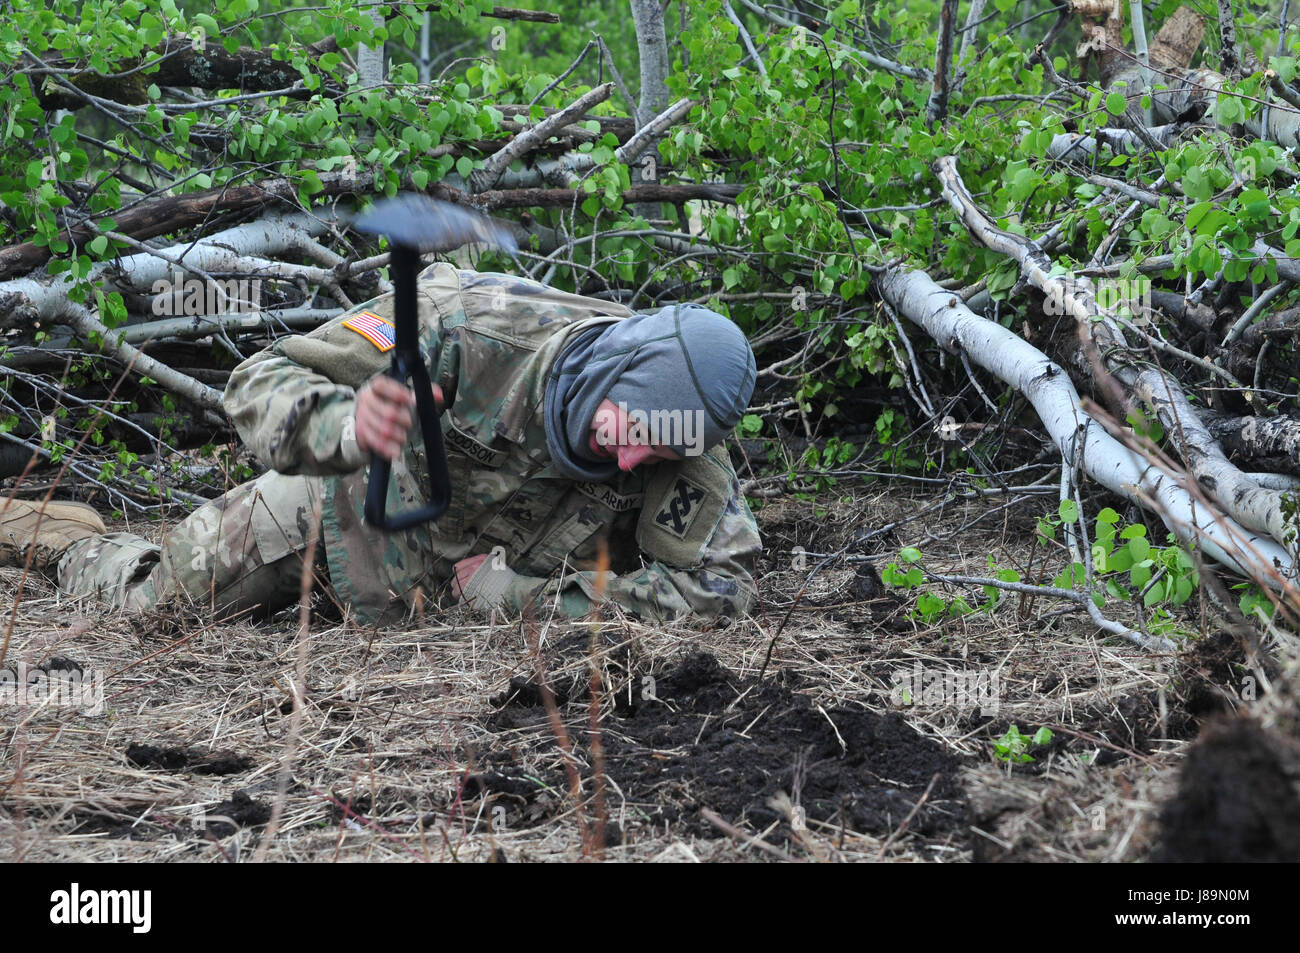 Pfc. Bradley Dodson, a maintenance mechanic from Ocala, Florida, digs a foxhole during Maple Resolve 17 at Camp Wainwright, Alberta, Canada, on May 24, 2017. Dodson’s unit, the 993rd Transportation Company, provided logistical and security support during the Canadian Army’s premier brigade-level validation exercise running 14-29 May. Stock Photo